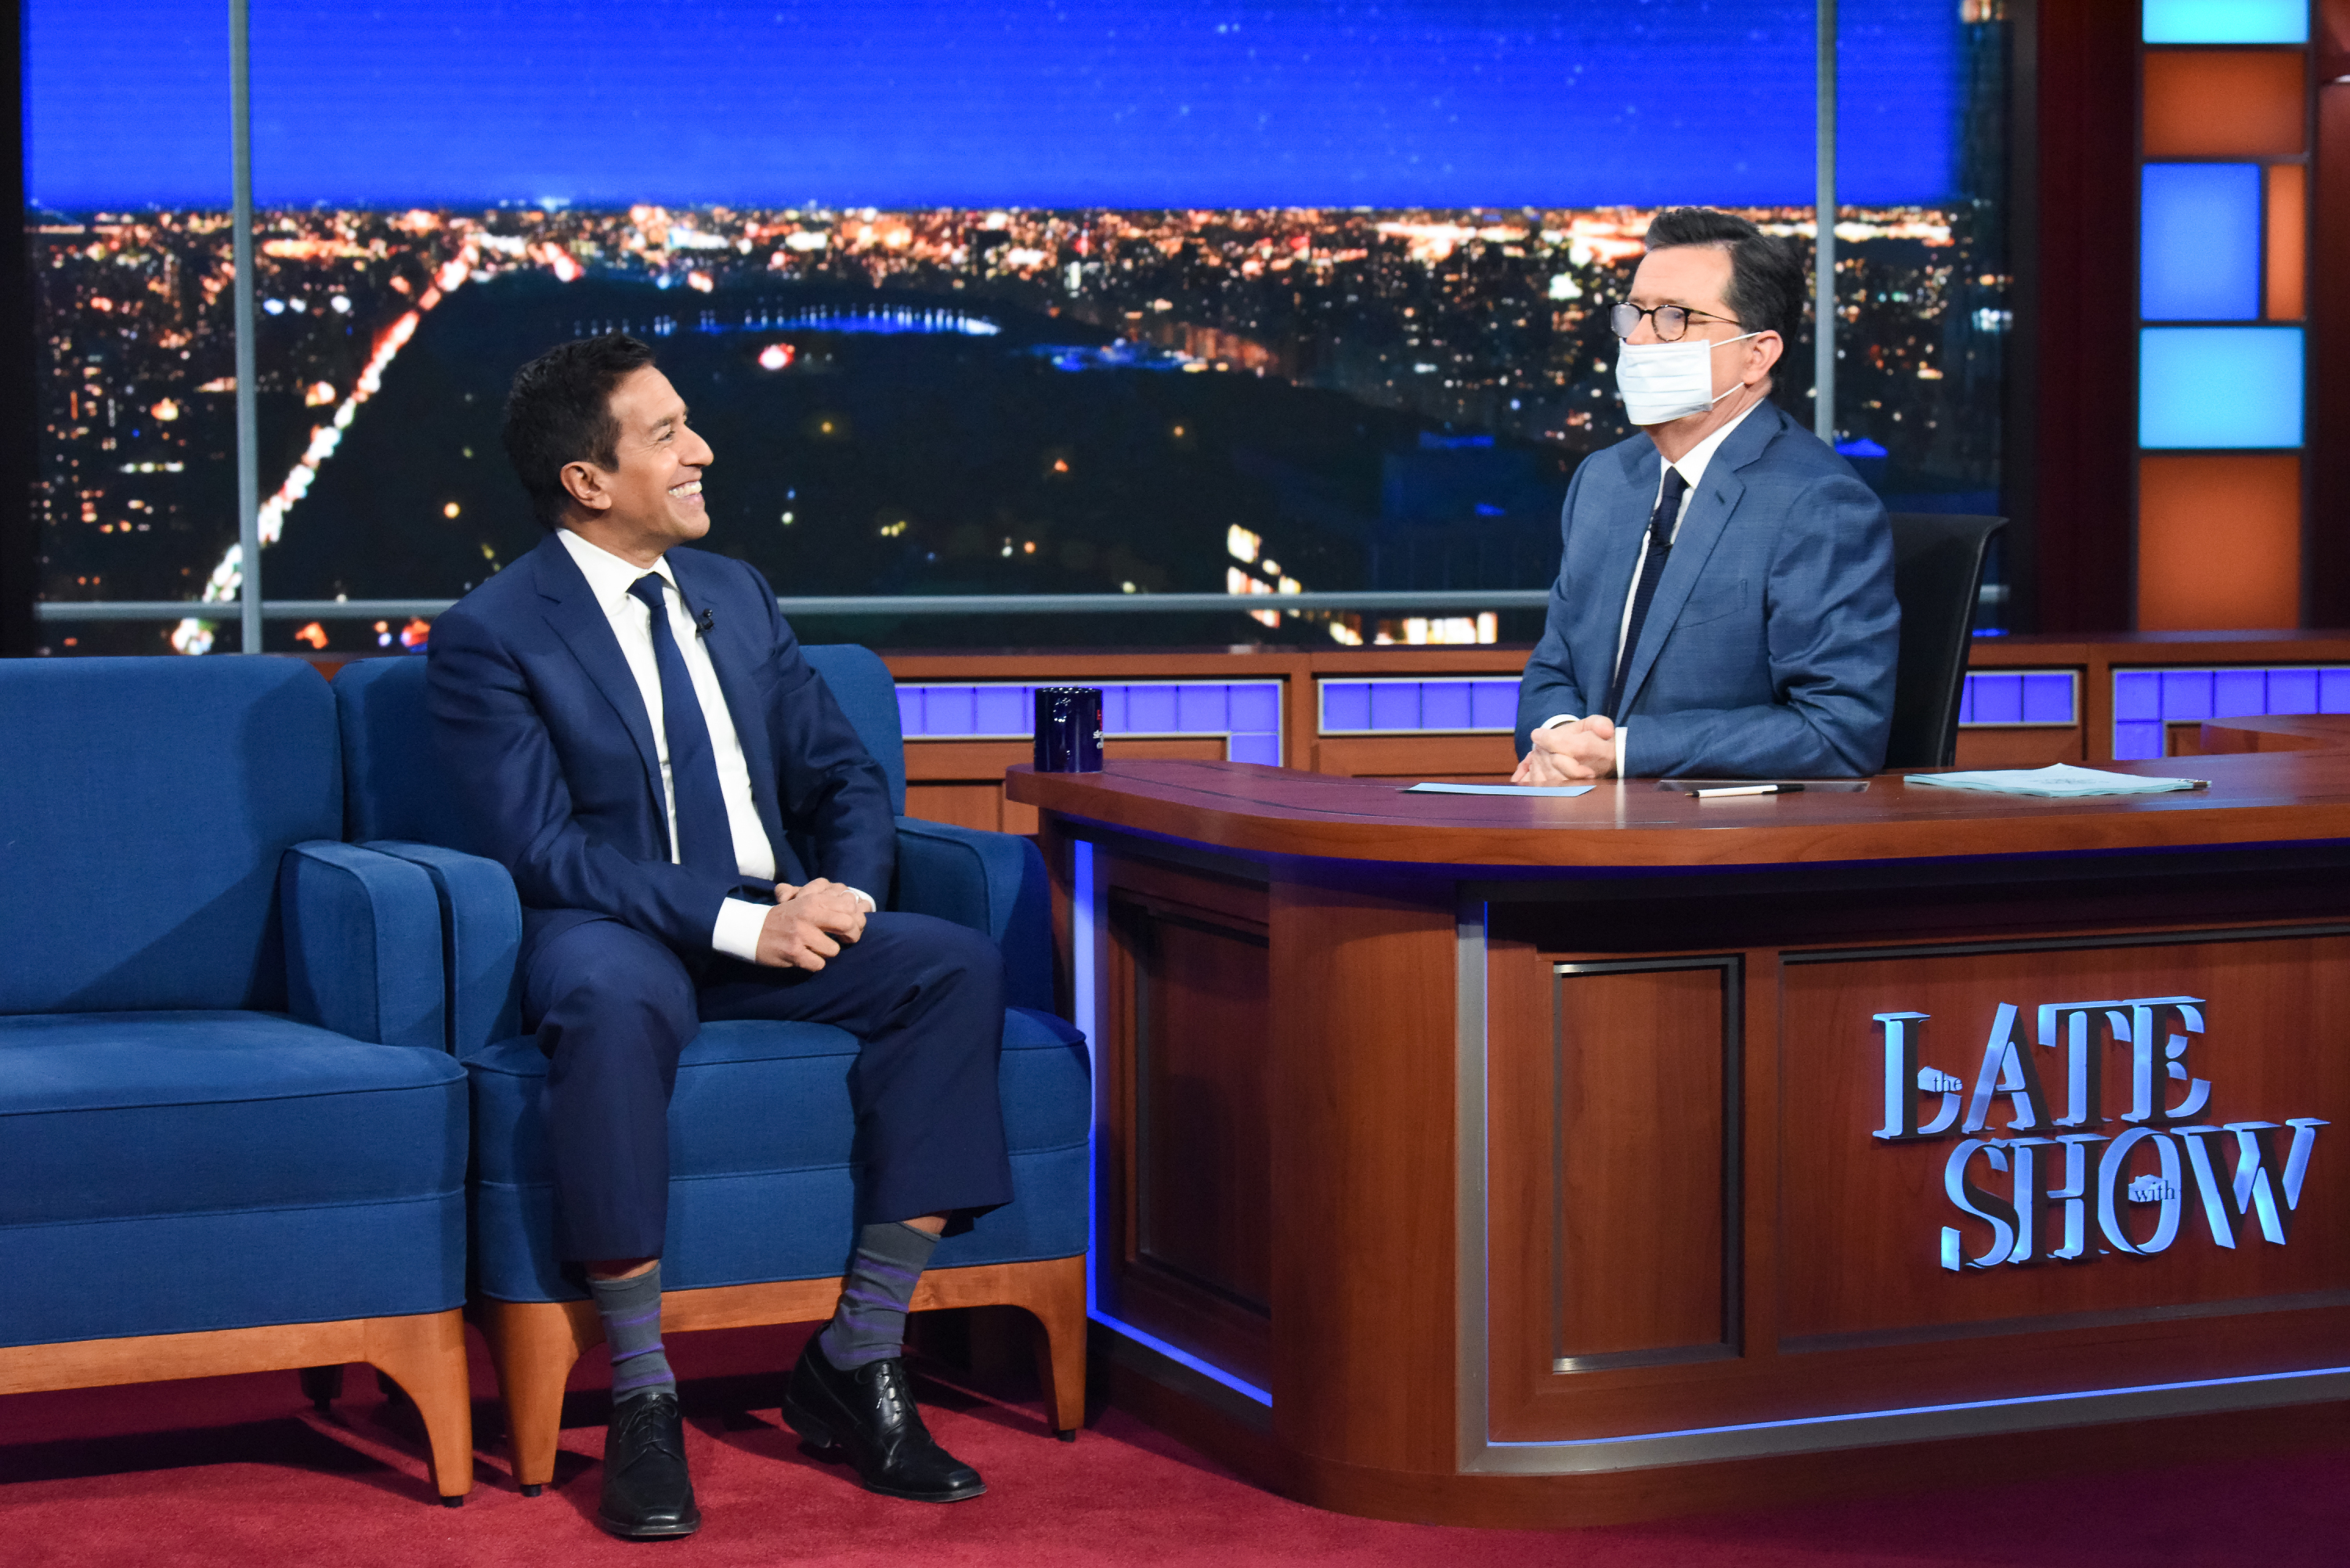 'The Late Show with Stephen Colbert' and guest Dr. Sanjay Gupta during the March 12, 2020 show. (CBS via Getty Images&mdash;2020 CBS Photo Archive)